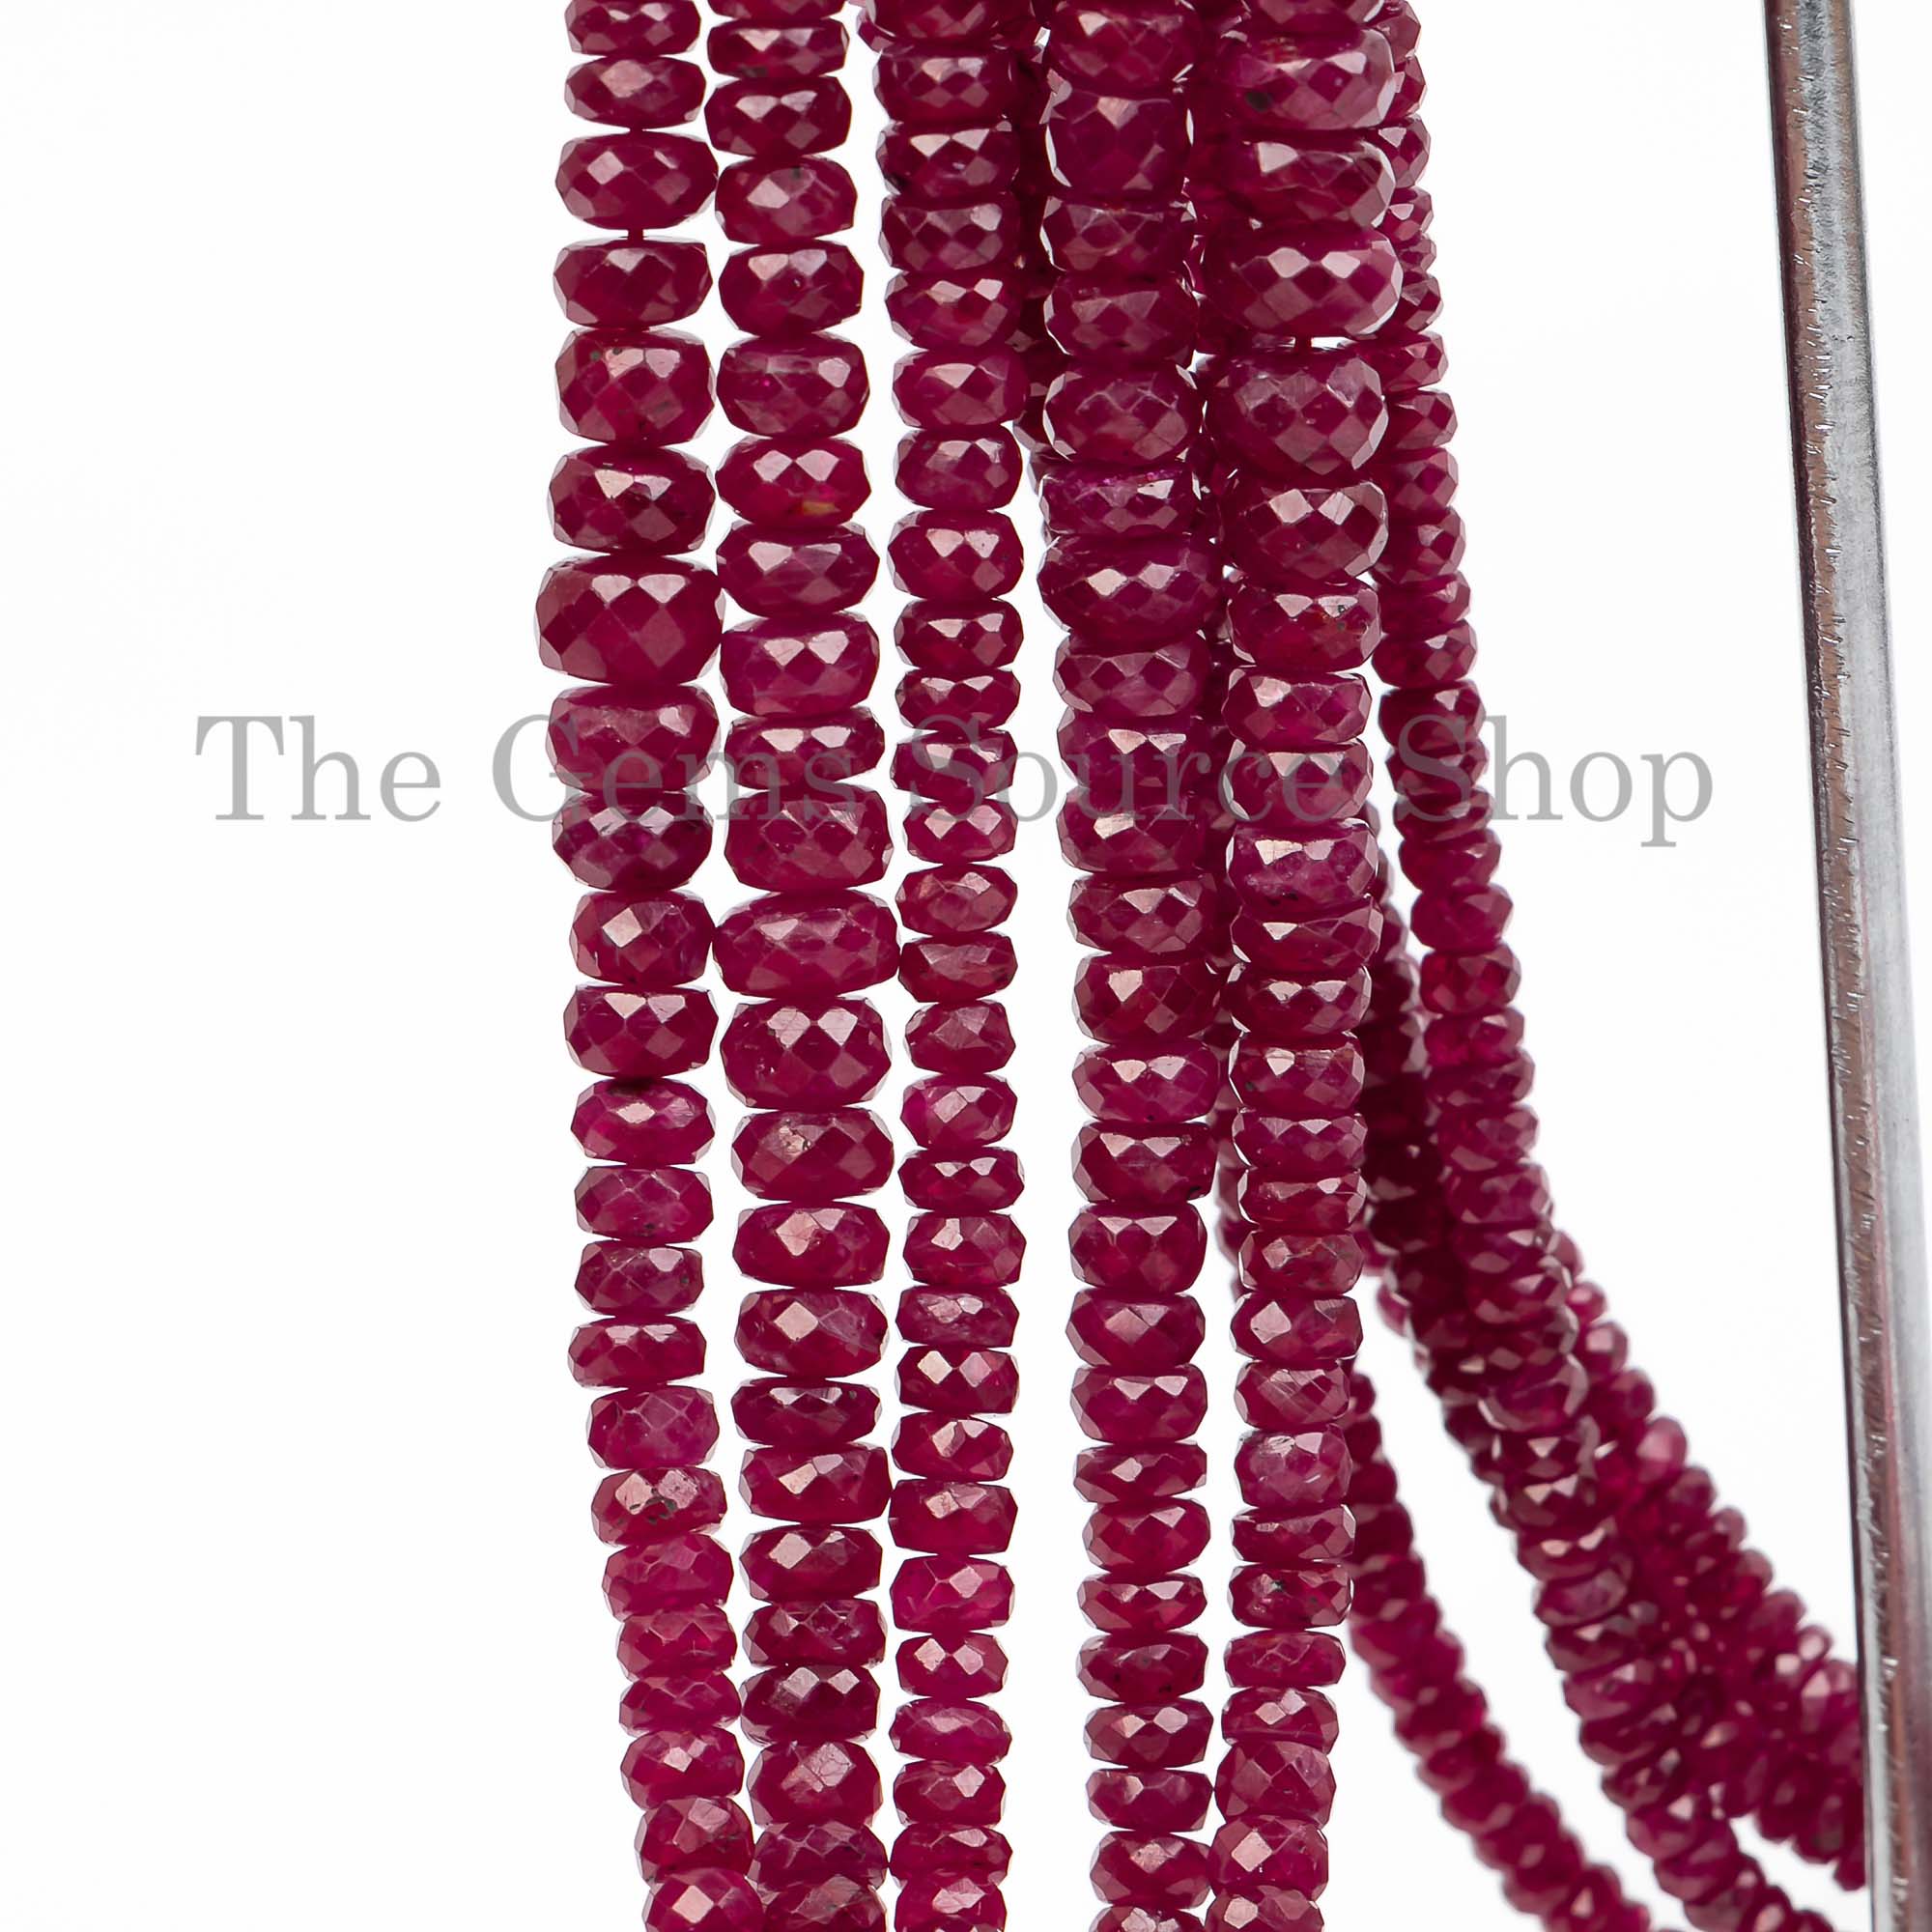 Ruby Rondelle Beads, Faceted Rondelle Beads, Ruby Rondelle Wholesale Beads